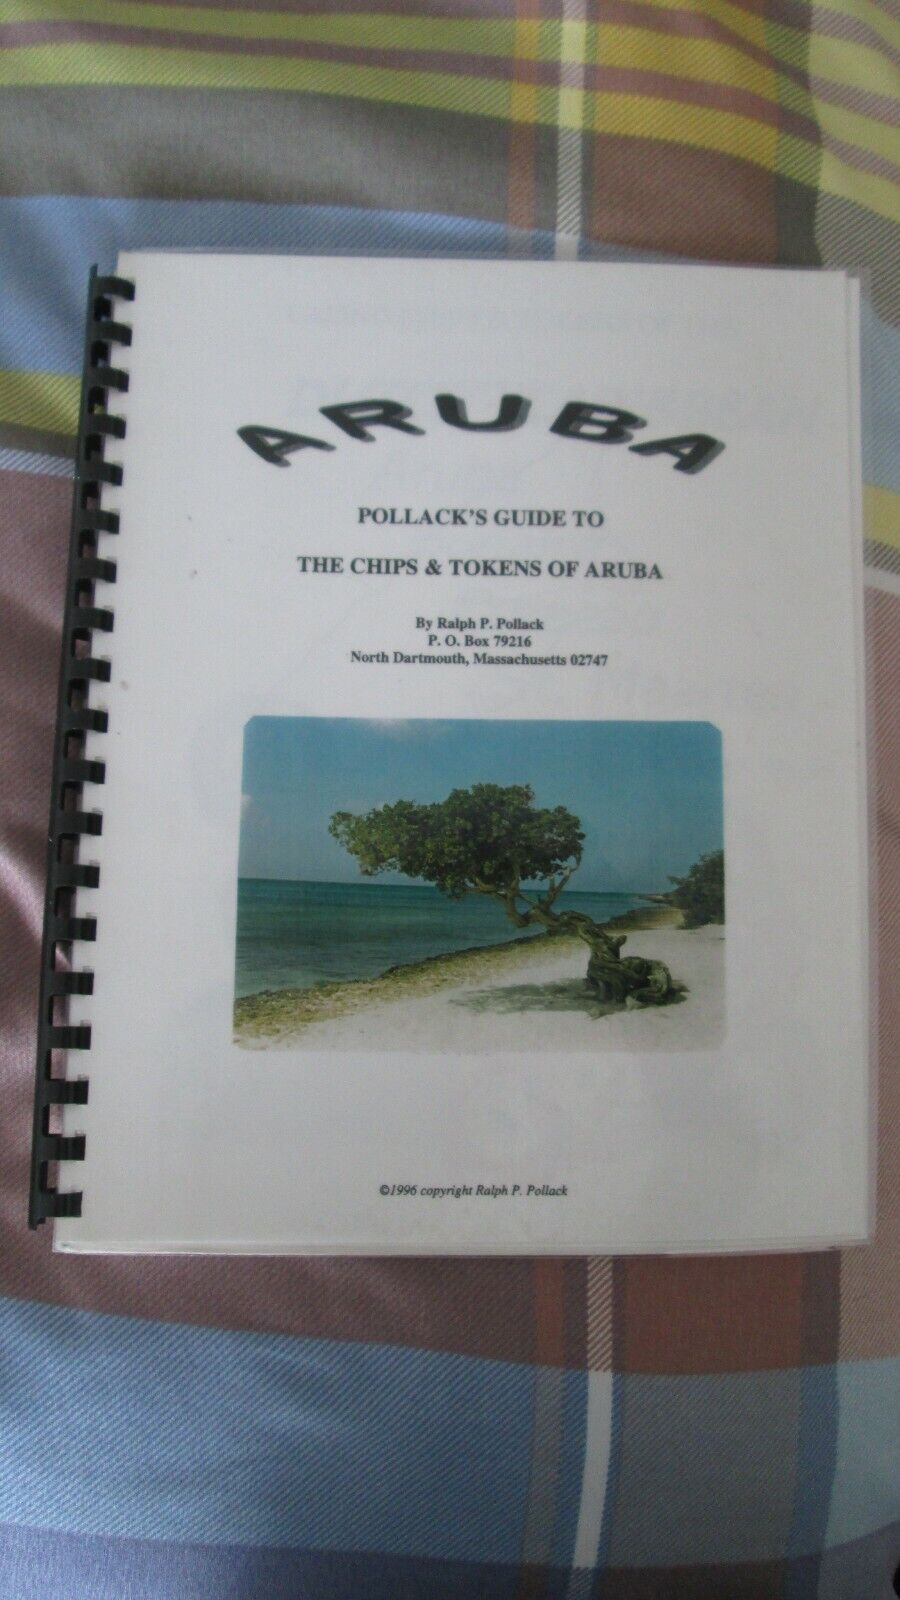 Pollack's Guide To The Chips & Tokens Of Aruba